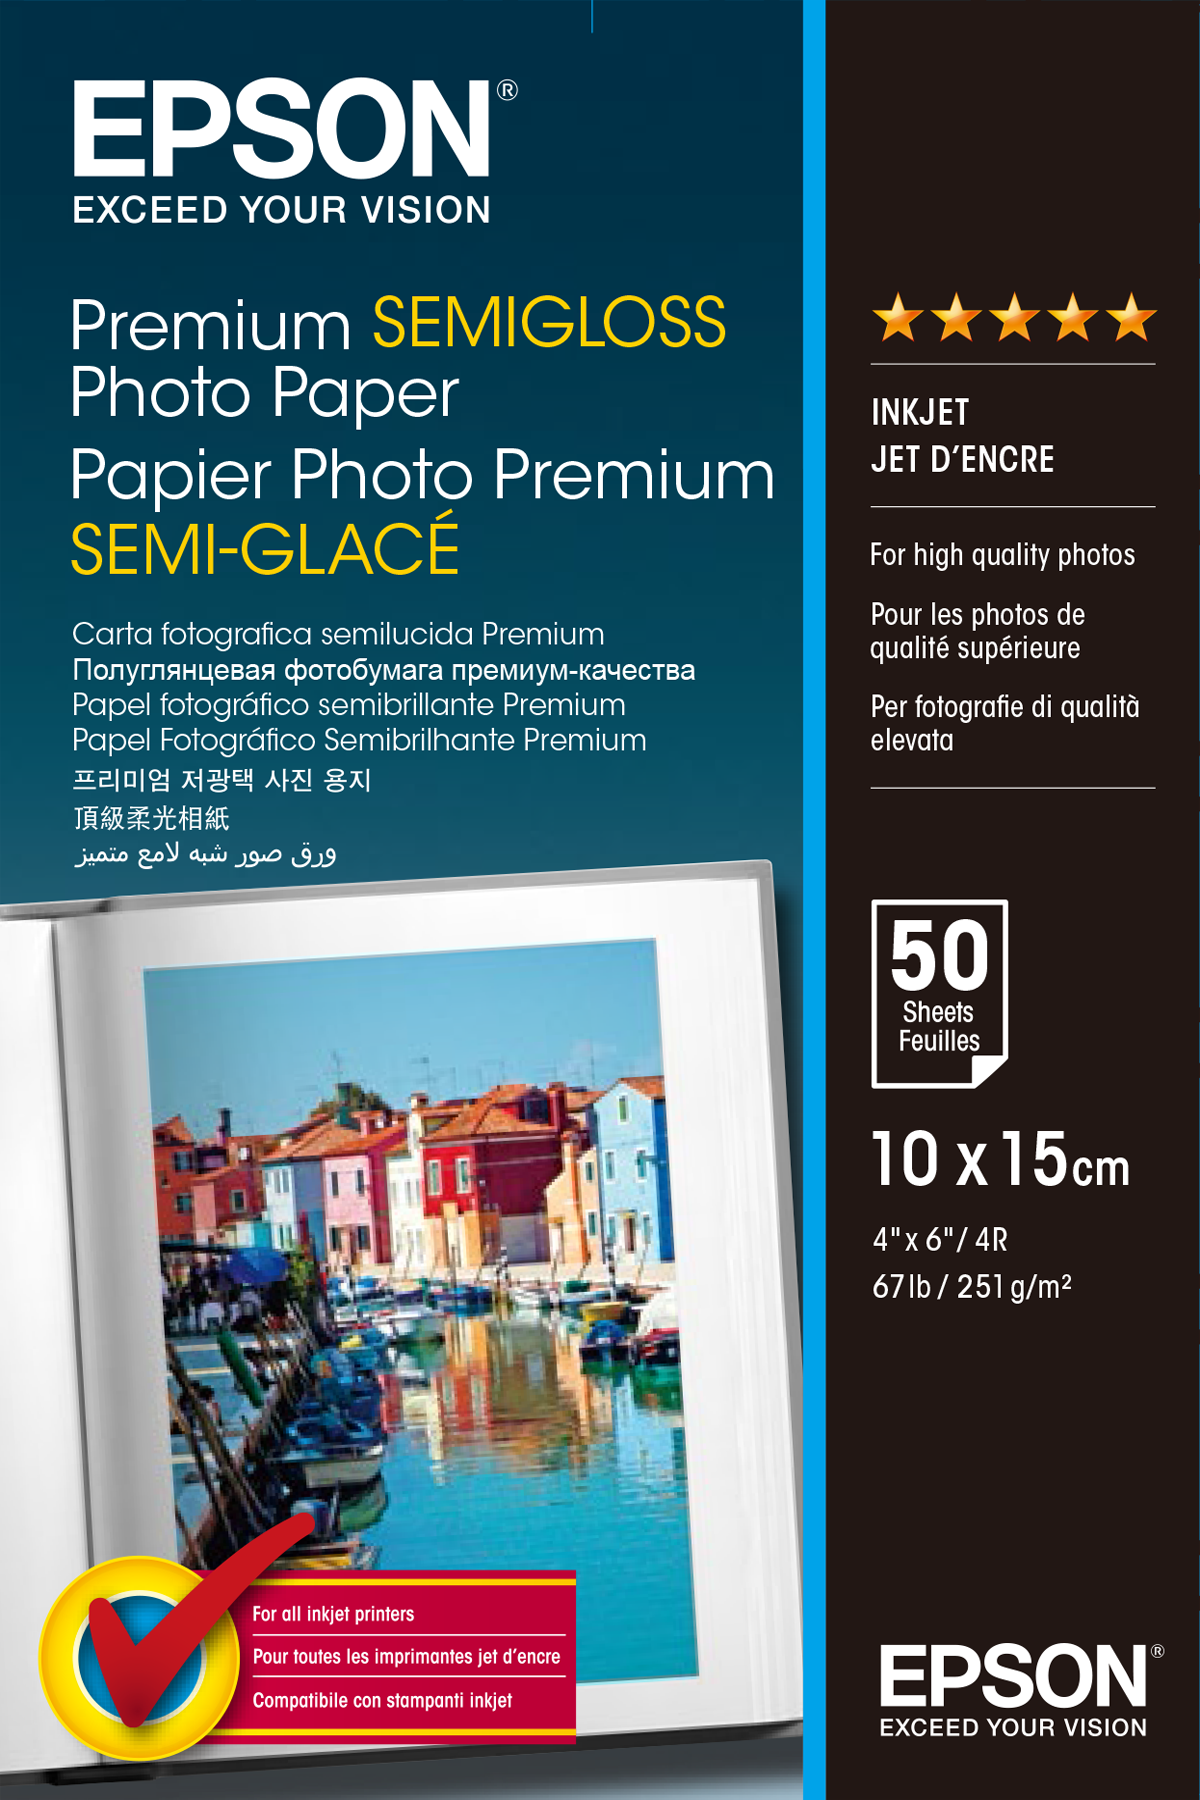 Premium Semi-Gloss Photo Paper - 10x15cm - 50 Sheets, Paper and Media, Ink & Paper, Products